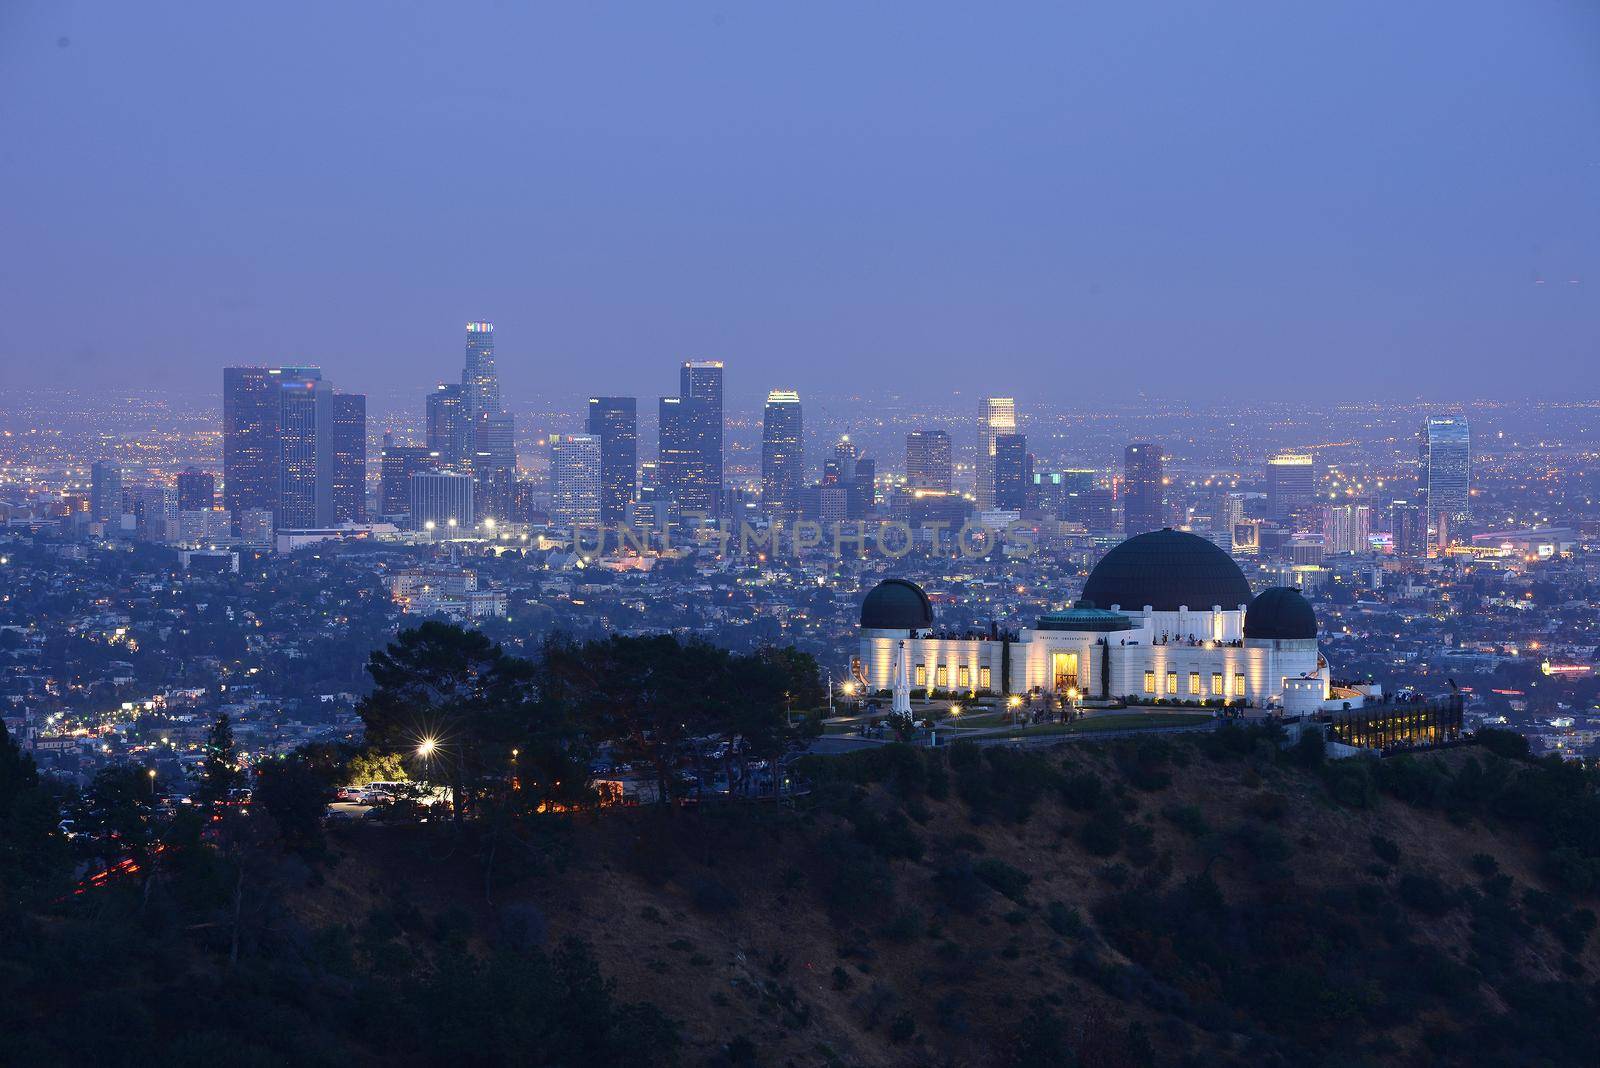 Griffith observatory by porbital